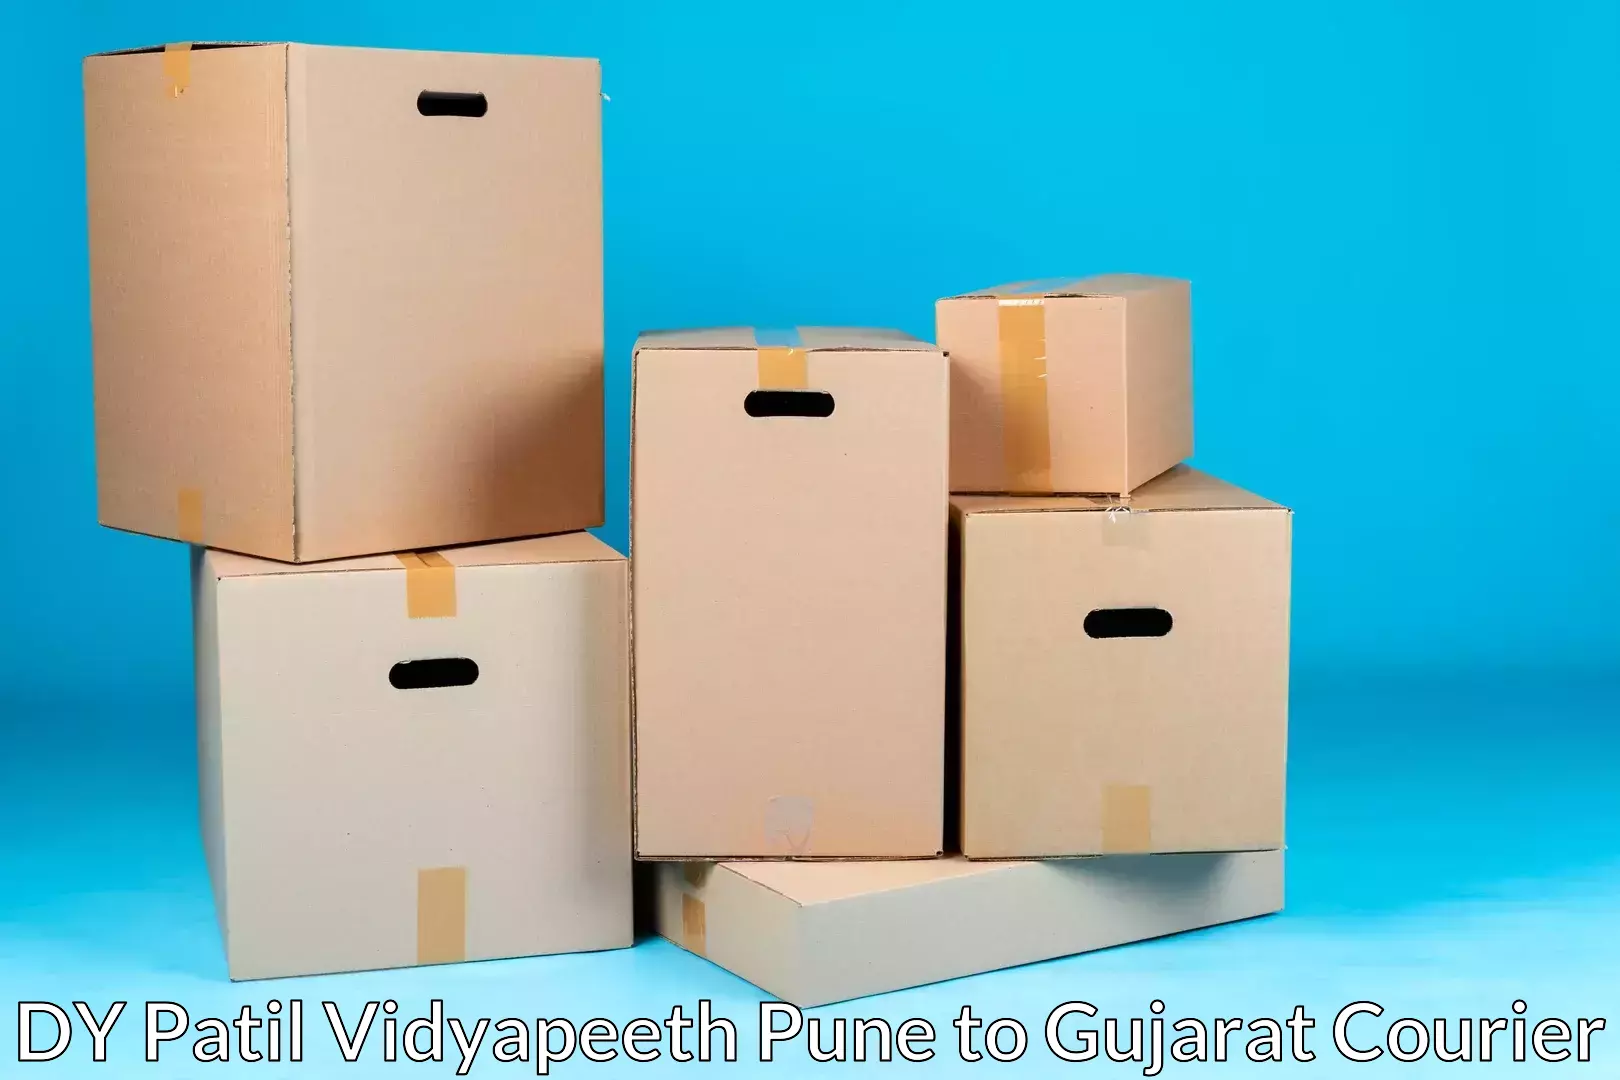 Specialized moving company DY Patil Vidyapeeth Pune to Halvad